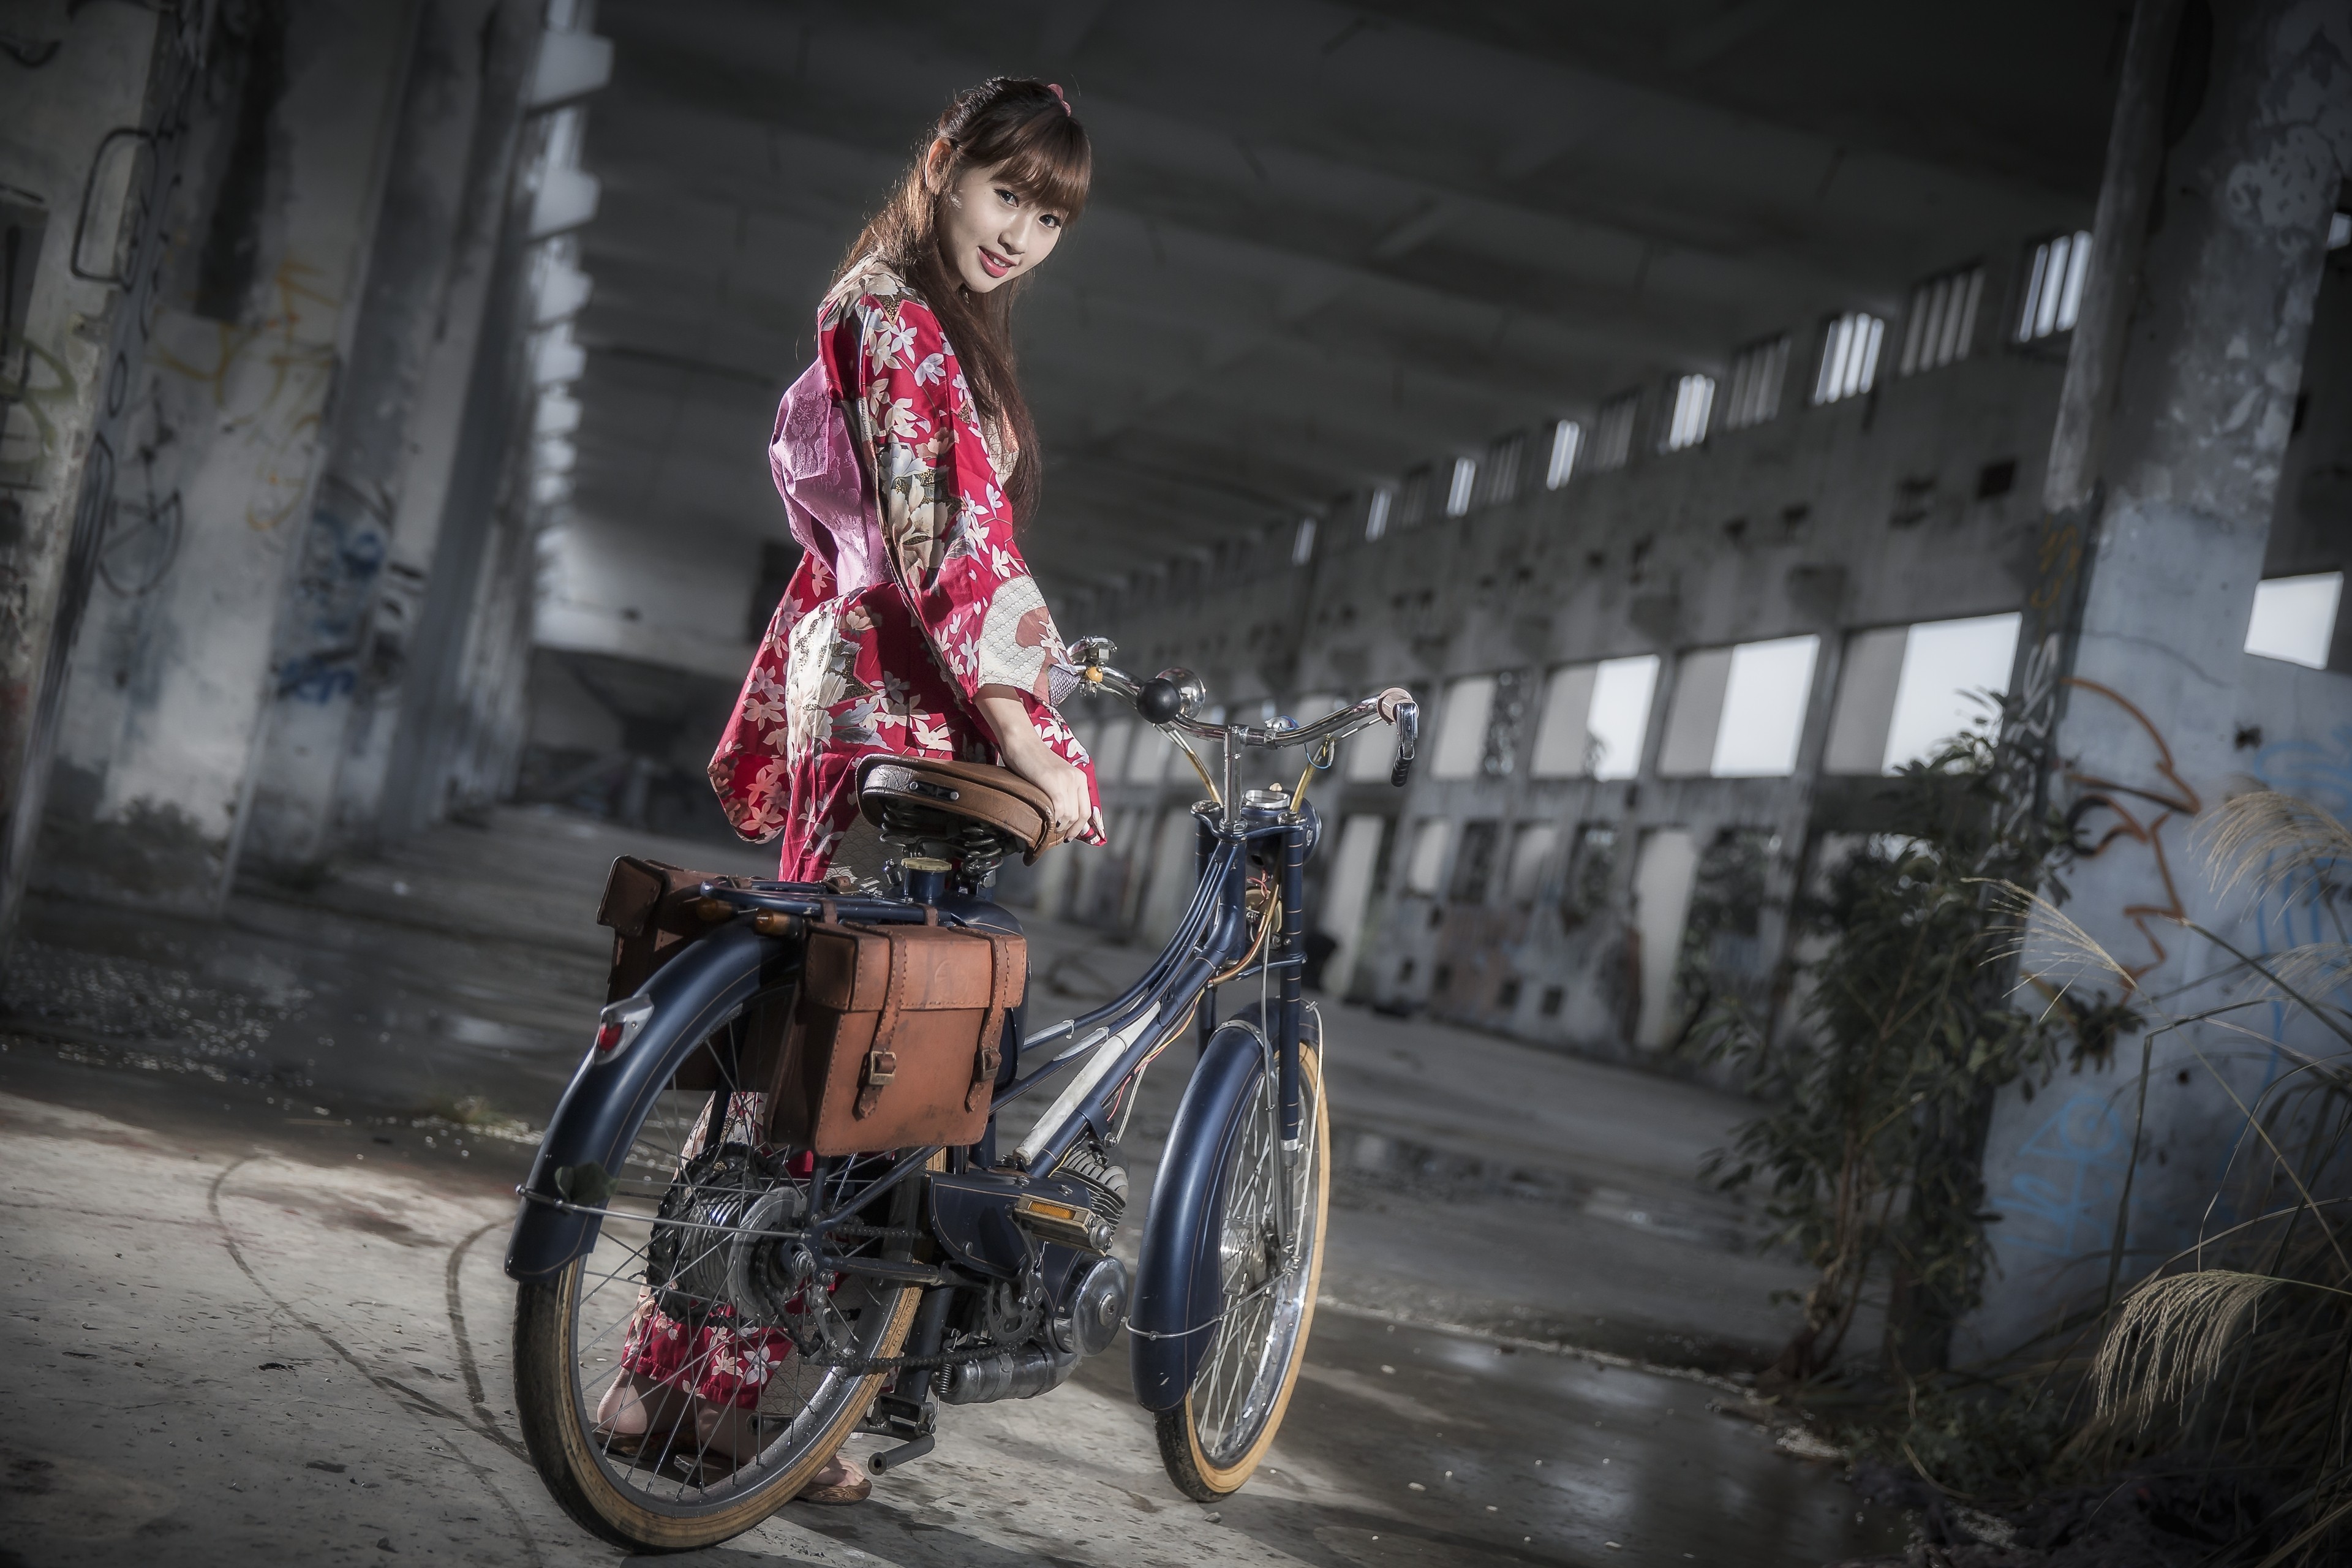 Asian Bicycle Women Model Women With Bicycles 3840x2560